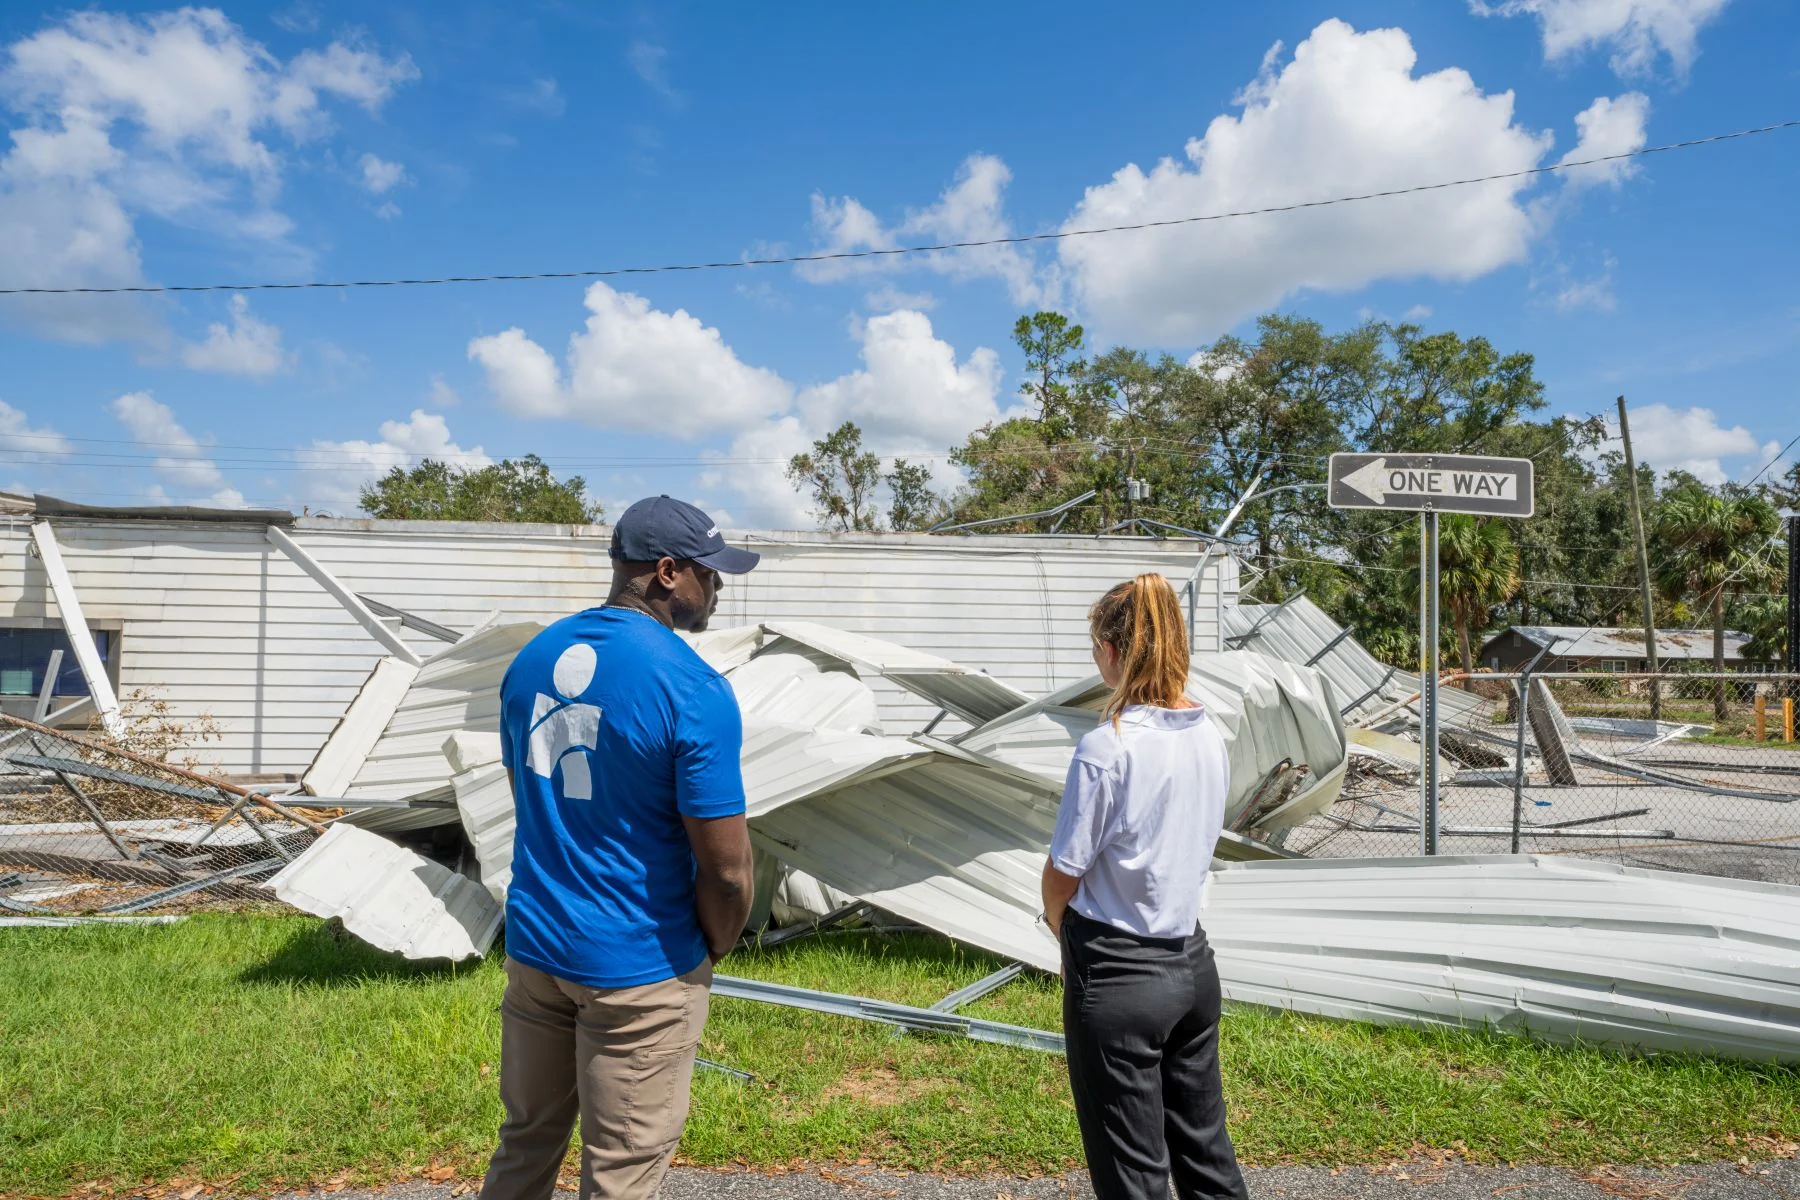 Americares team member in blue shirt stands beside person in white shirt surveying a destroyed building with one way sign still standing in wreckage.